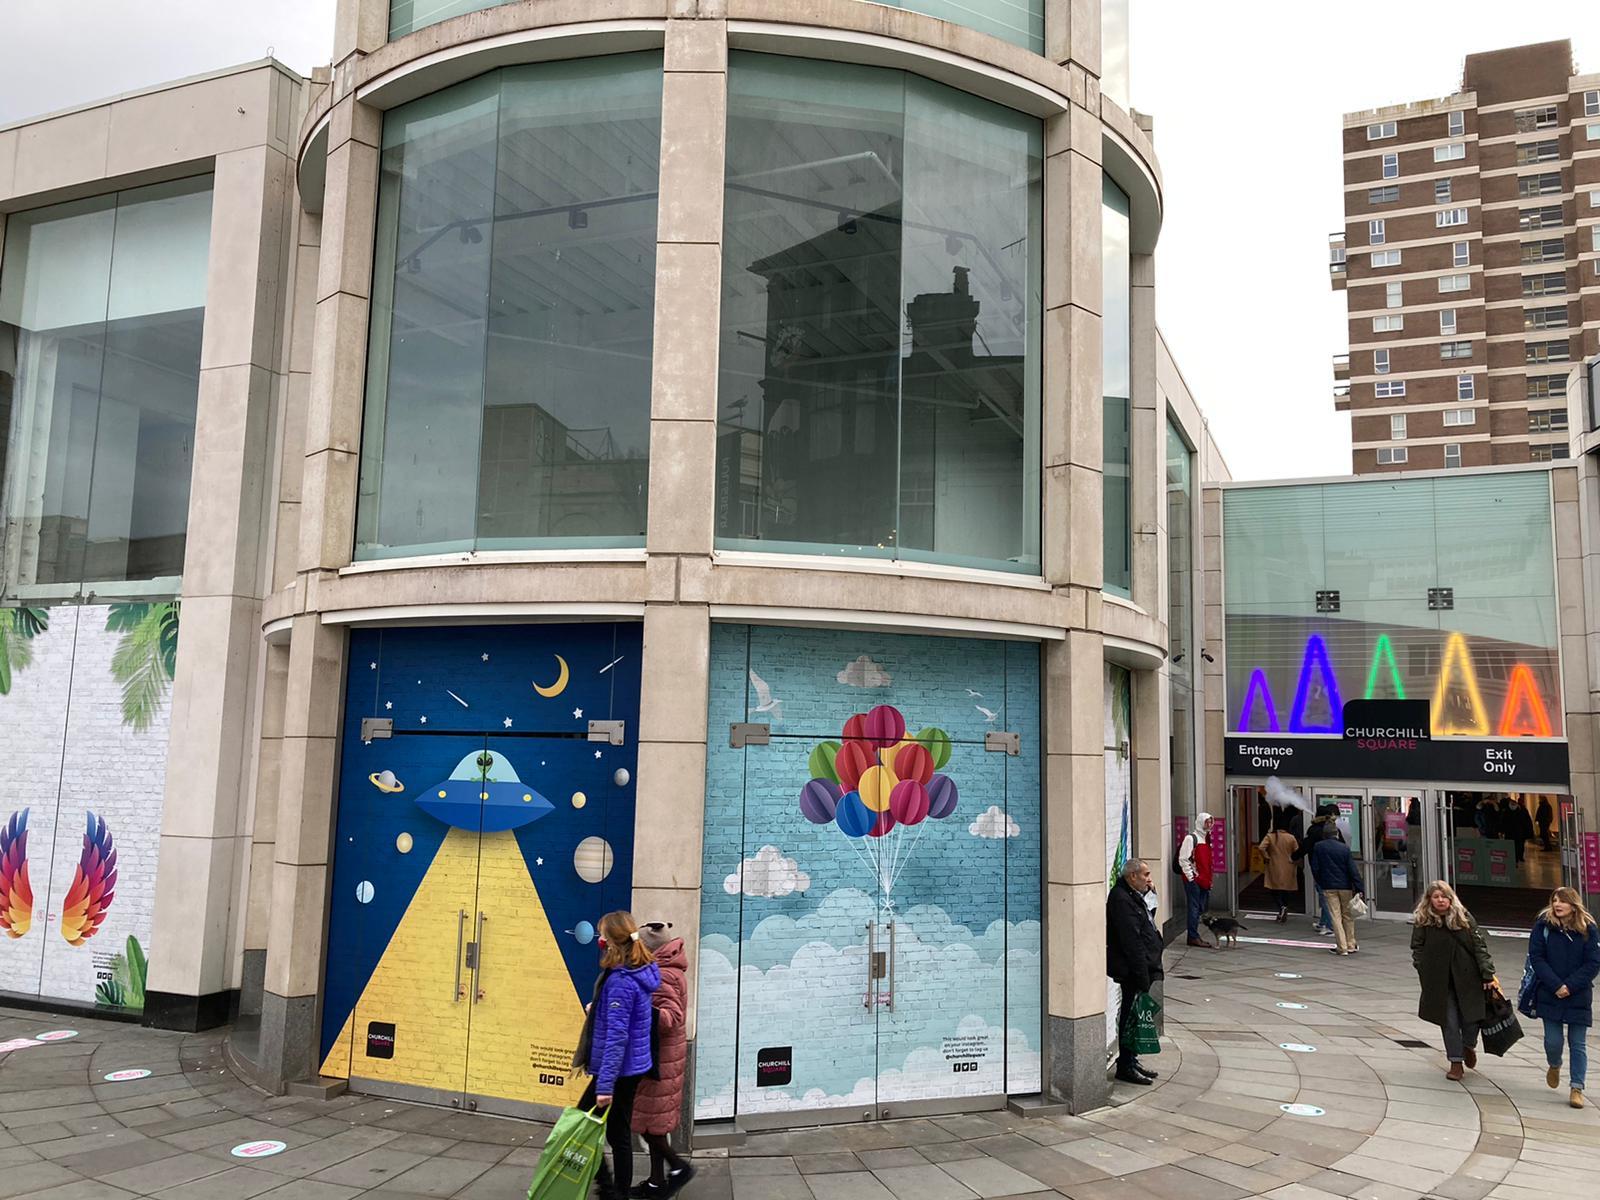 There are a large number of empty and closed down shops in Brighton and Hove following a difficult year for businesses during the coronavirus pandemic